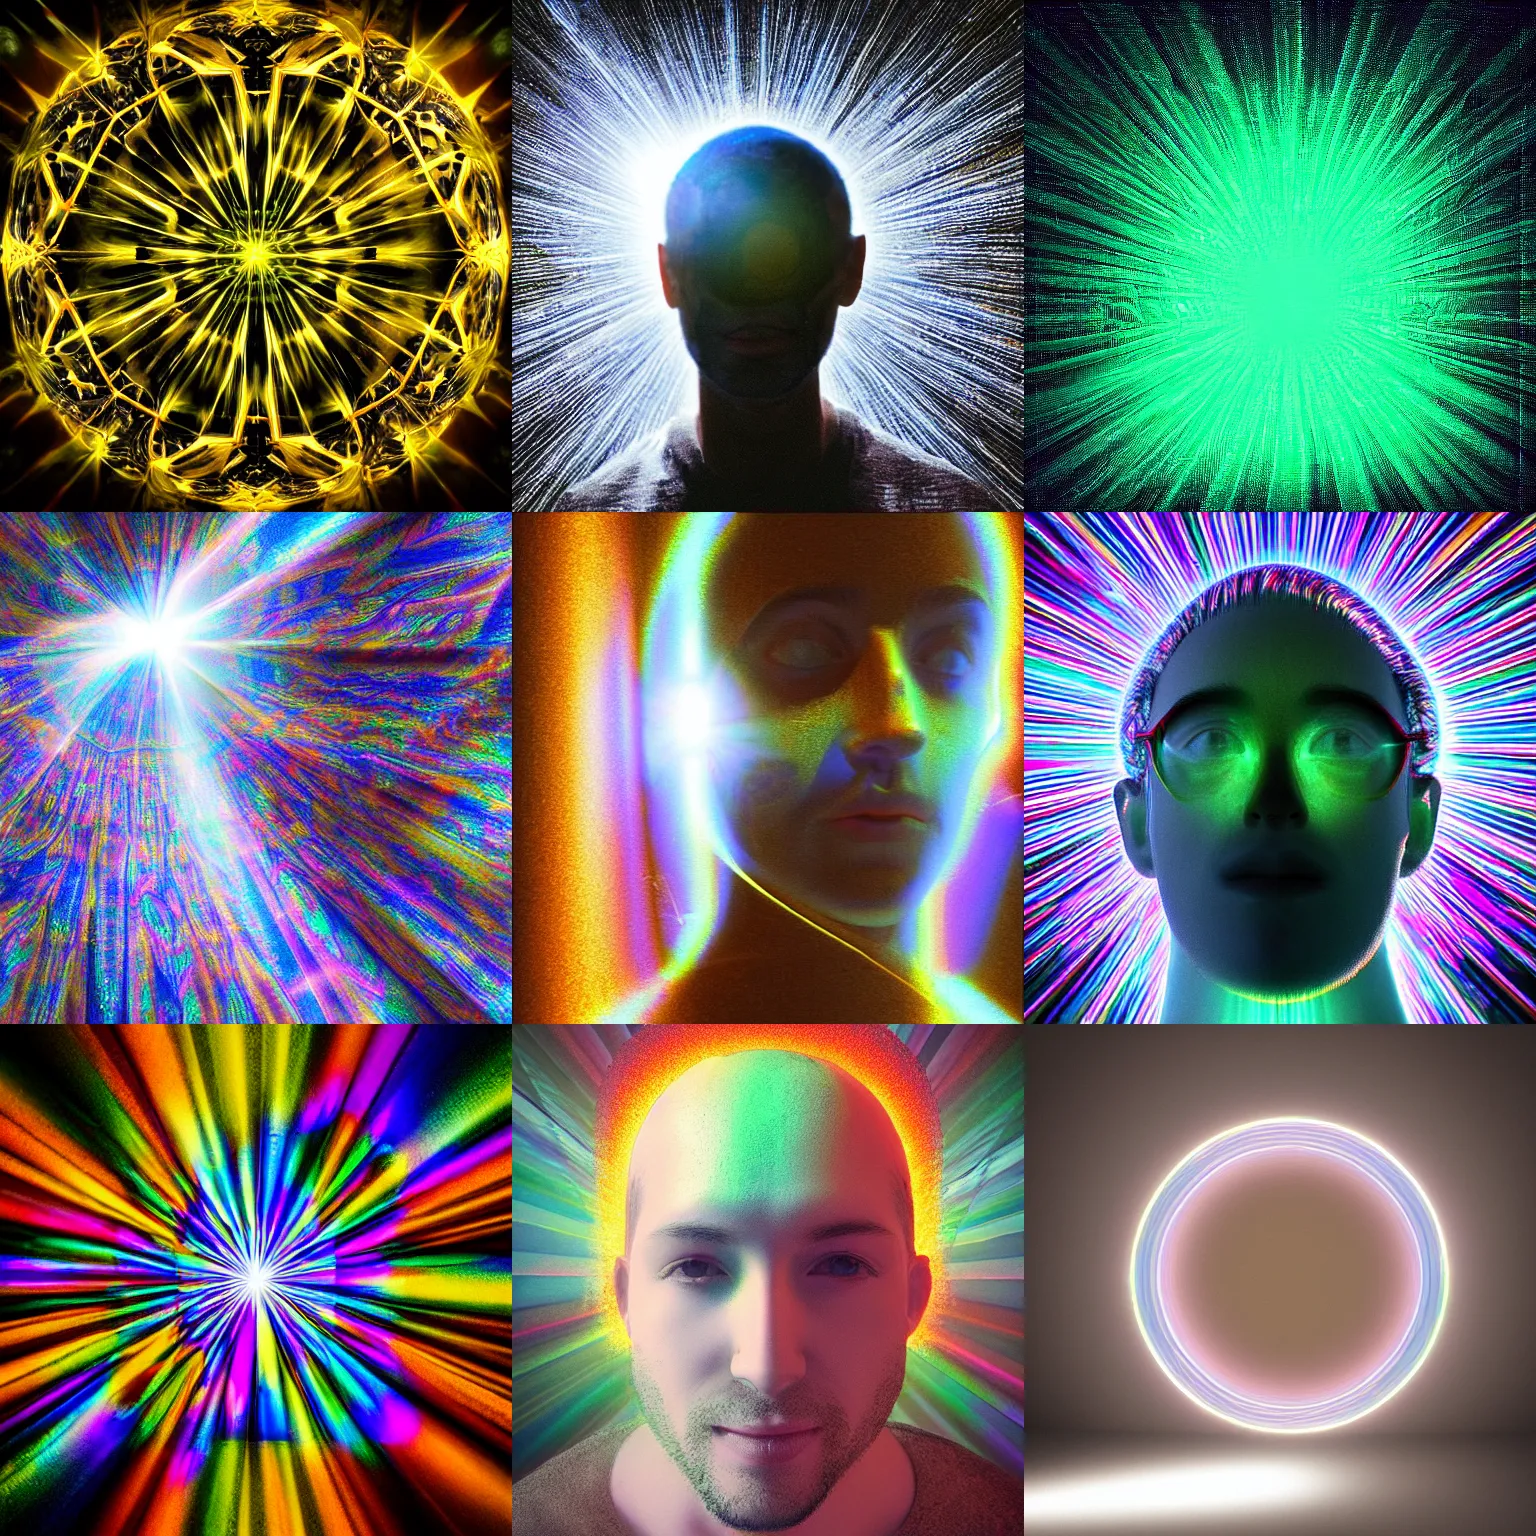 Prompt: “Ivan the wholesome prismatic person, refracted light, caustics, light rays shining through, 4k photo”